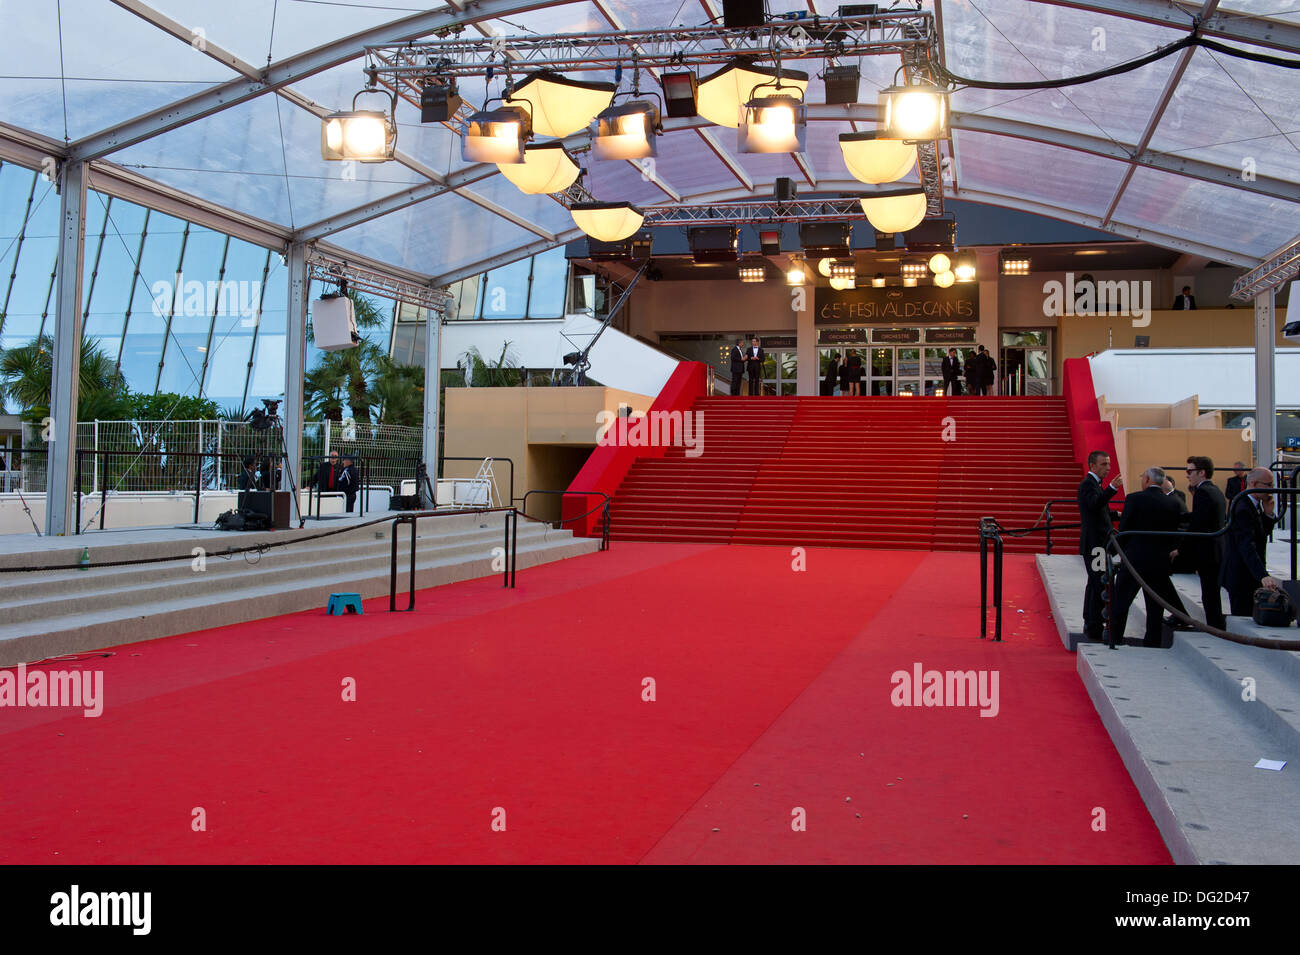 CANNES, FRANCE - MAY 23: Palais des Festivals during the 65th Annual Cannes Film Festival on May 23, 2012 in Cannes, France Stock Photo